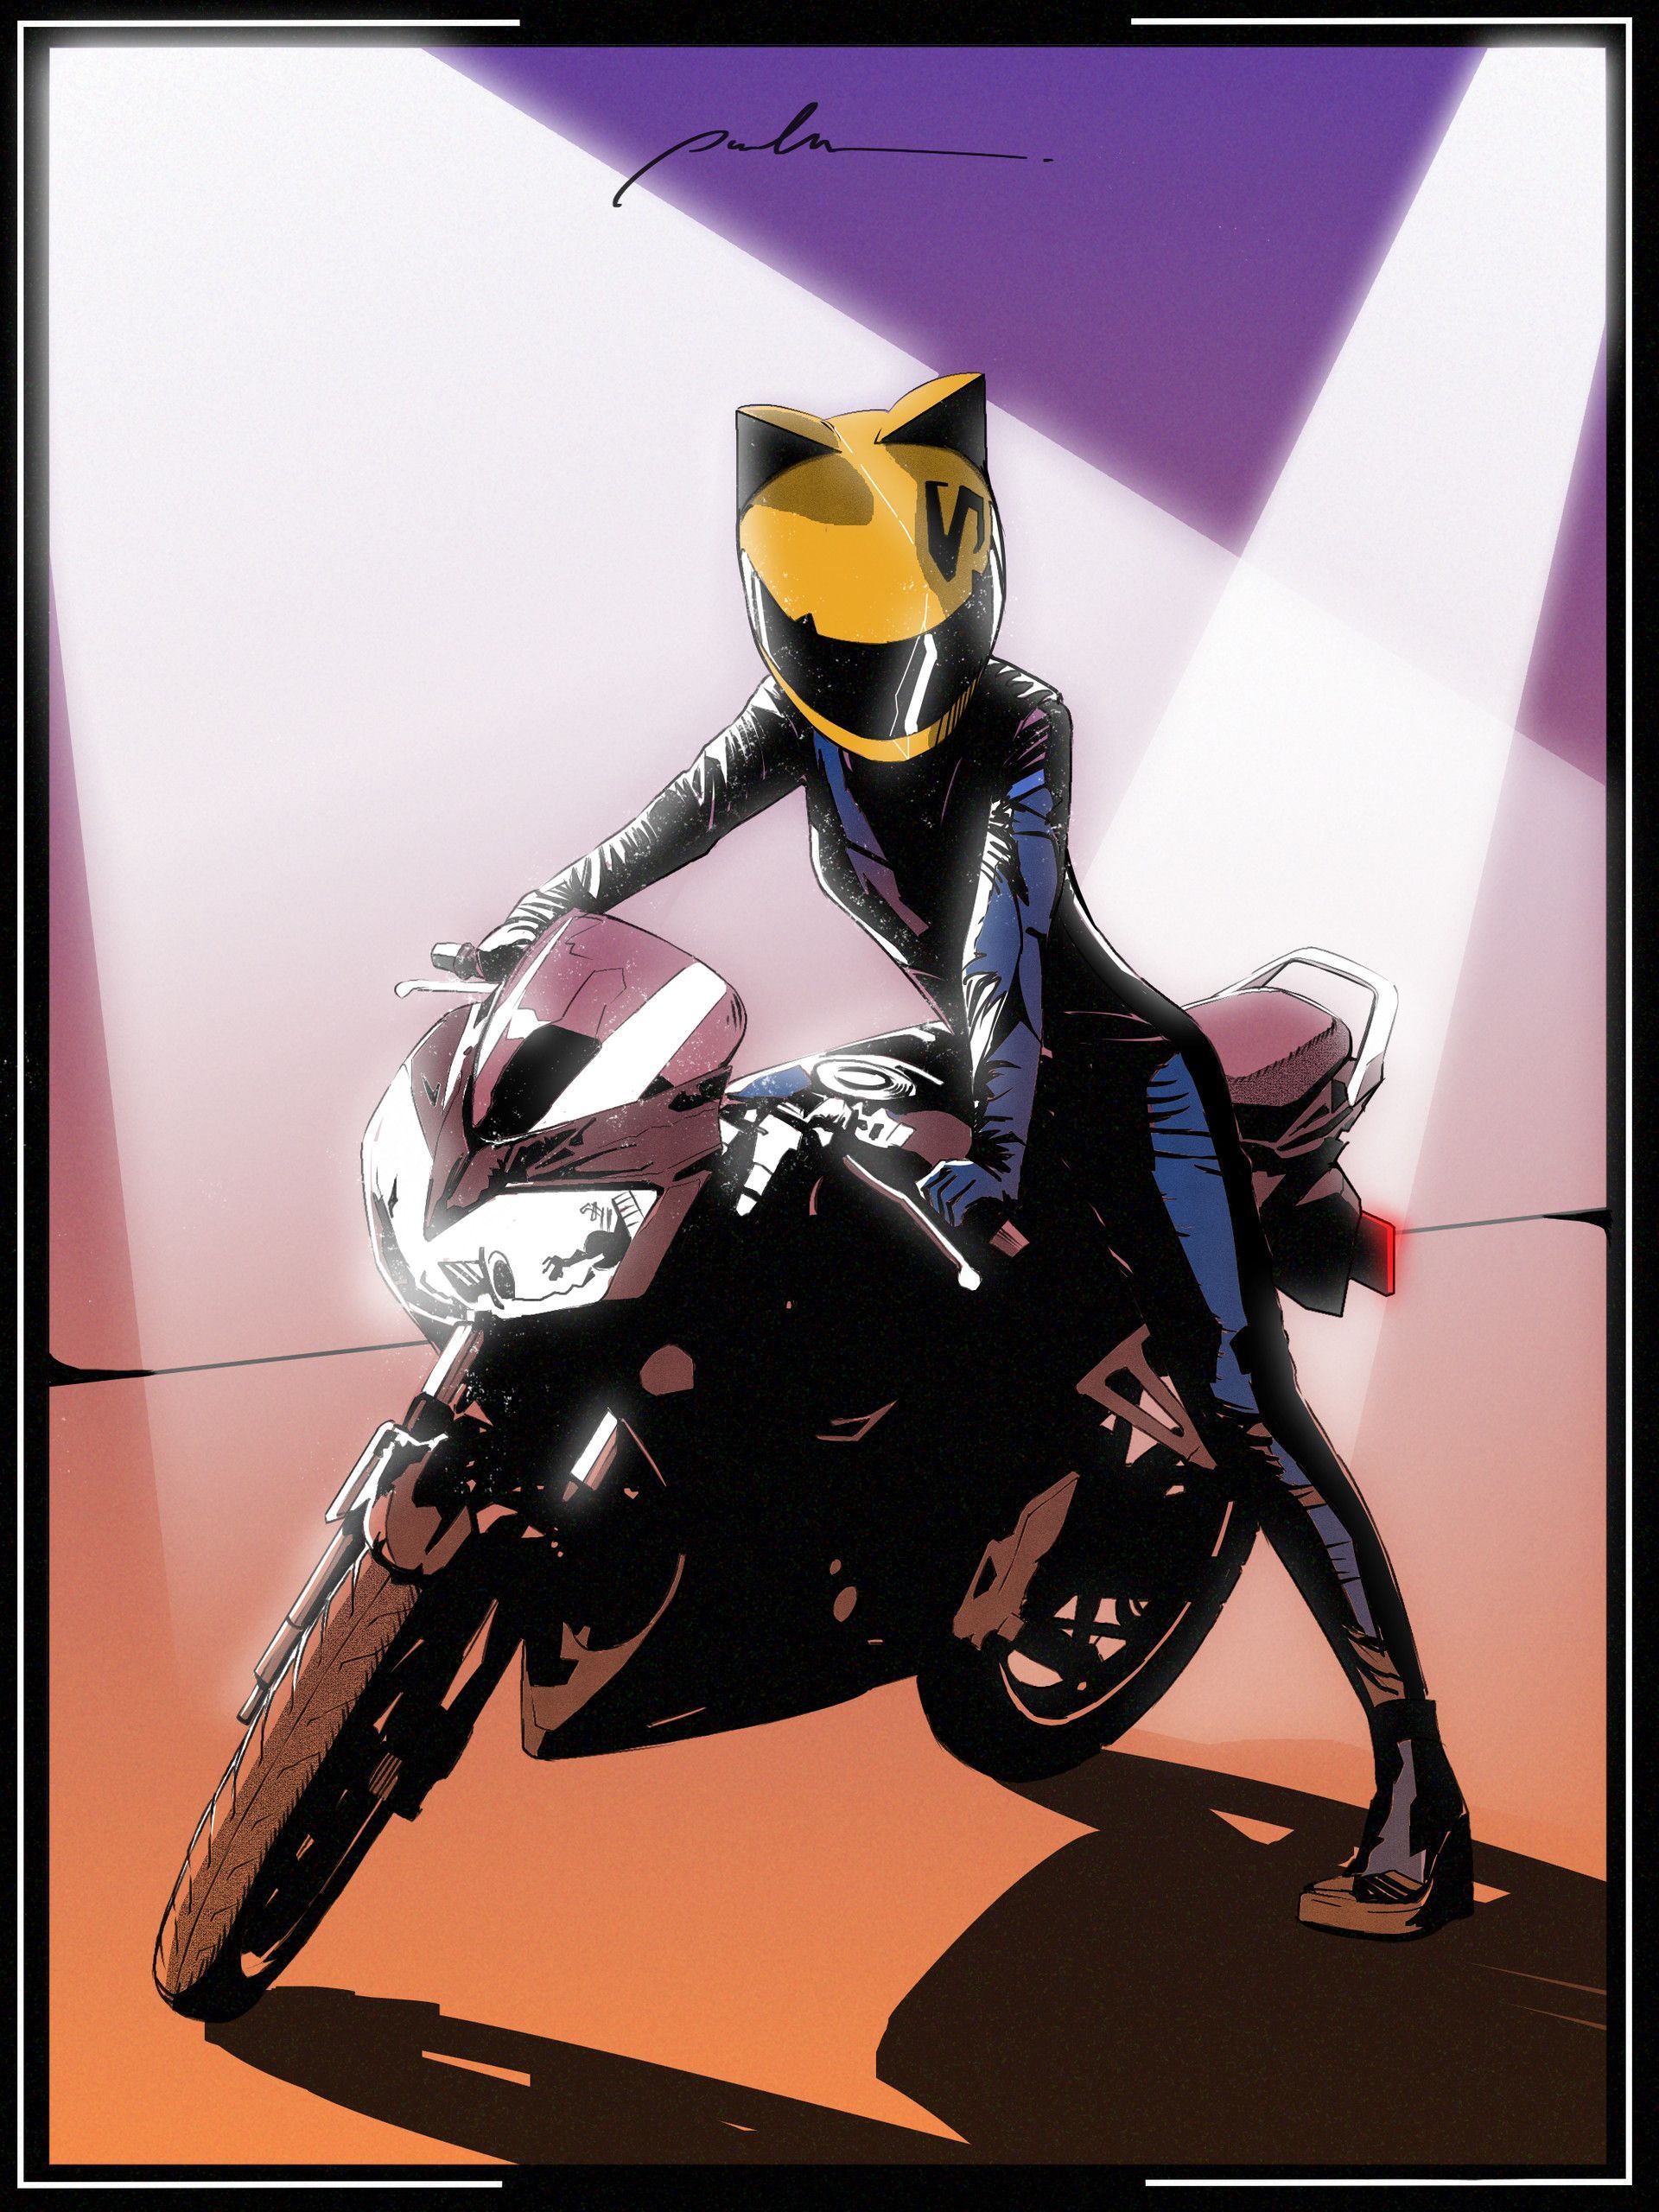 An Anime Girl With A Helmet Riding A Vintage Motorcycle On A Sci Fi Planet  Art 2 Stock Photo, Picture and Royalty Free Image. Image 192714172.